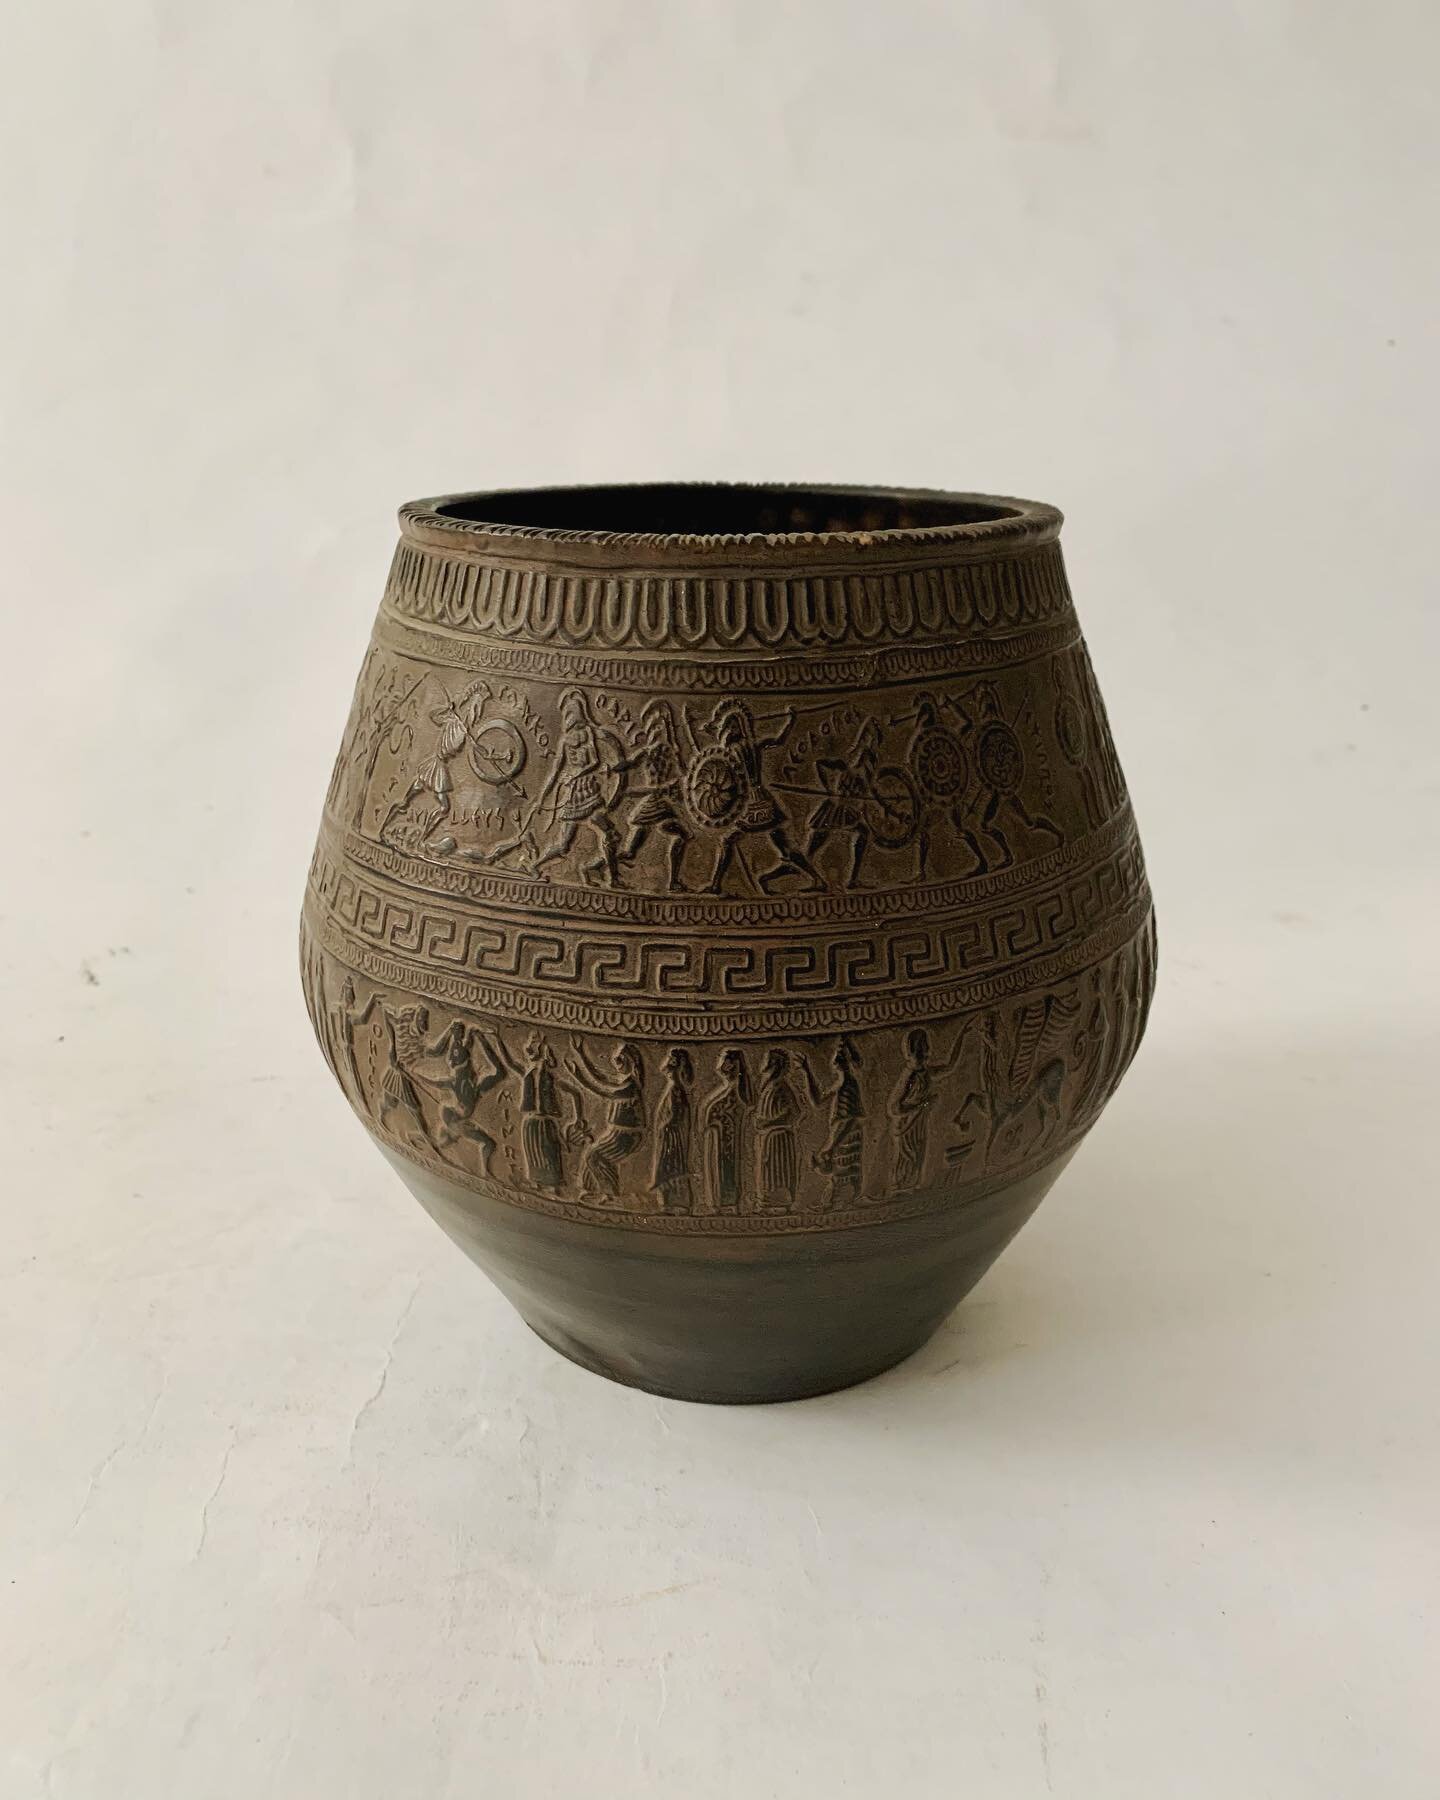 A classical incised carved pottery vessel 7x8&rdquo; $78.00 #citycountrycottage #interiors #kitchendesign #modernfarmhouse #vintagefineobjects #dmforinq